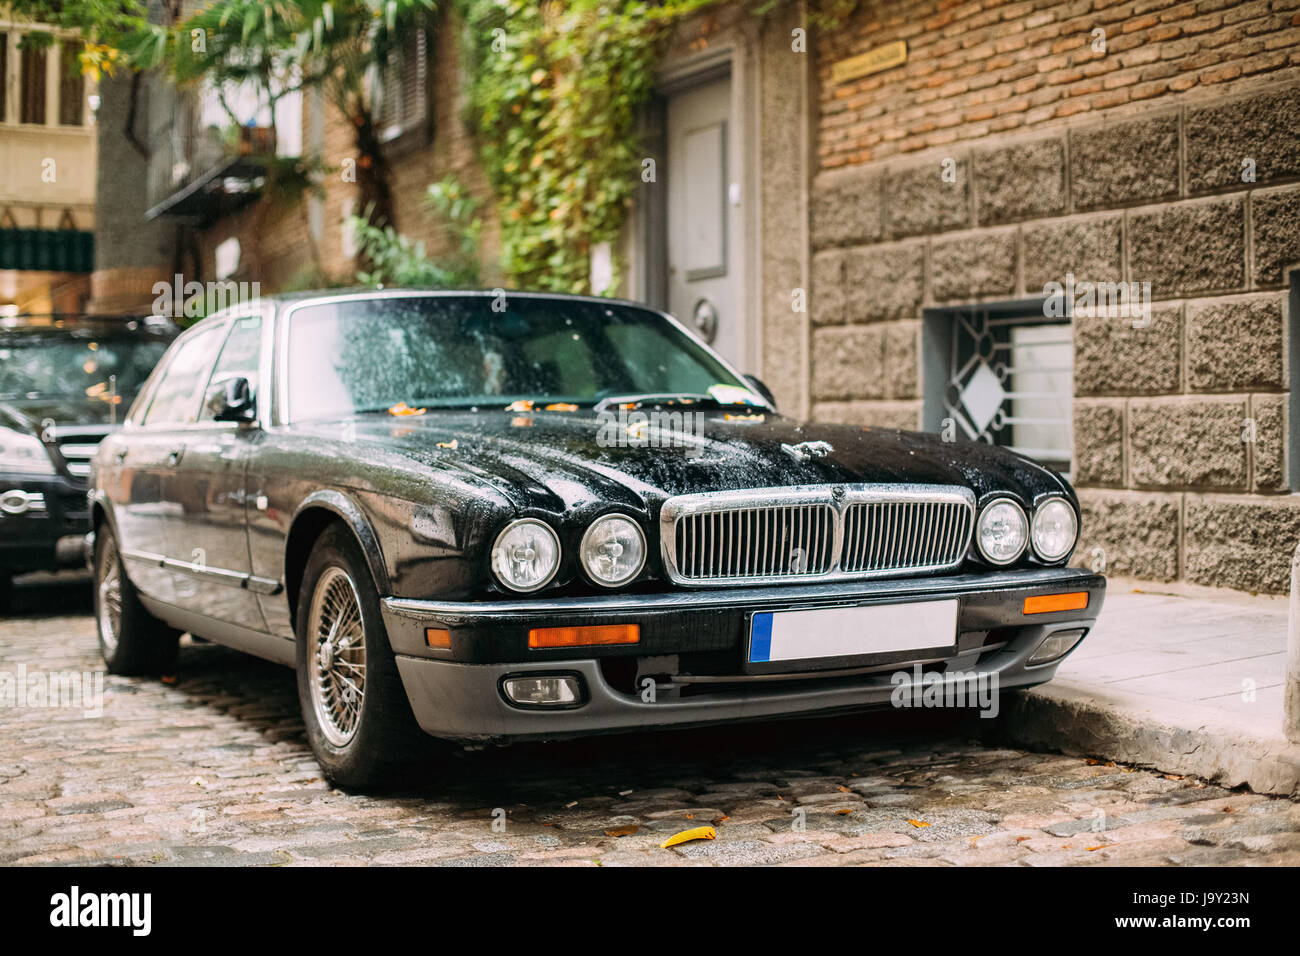 Tbilisi, Georgia - October 22, 2016:  The Jaguar XJ (X308) Sedan Car Parked In Street.  Jaguar Xj X308 Is A Luxury Saloon Manufactured And Sold By Jag Stock Photo